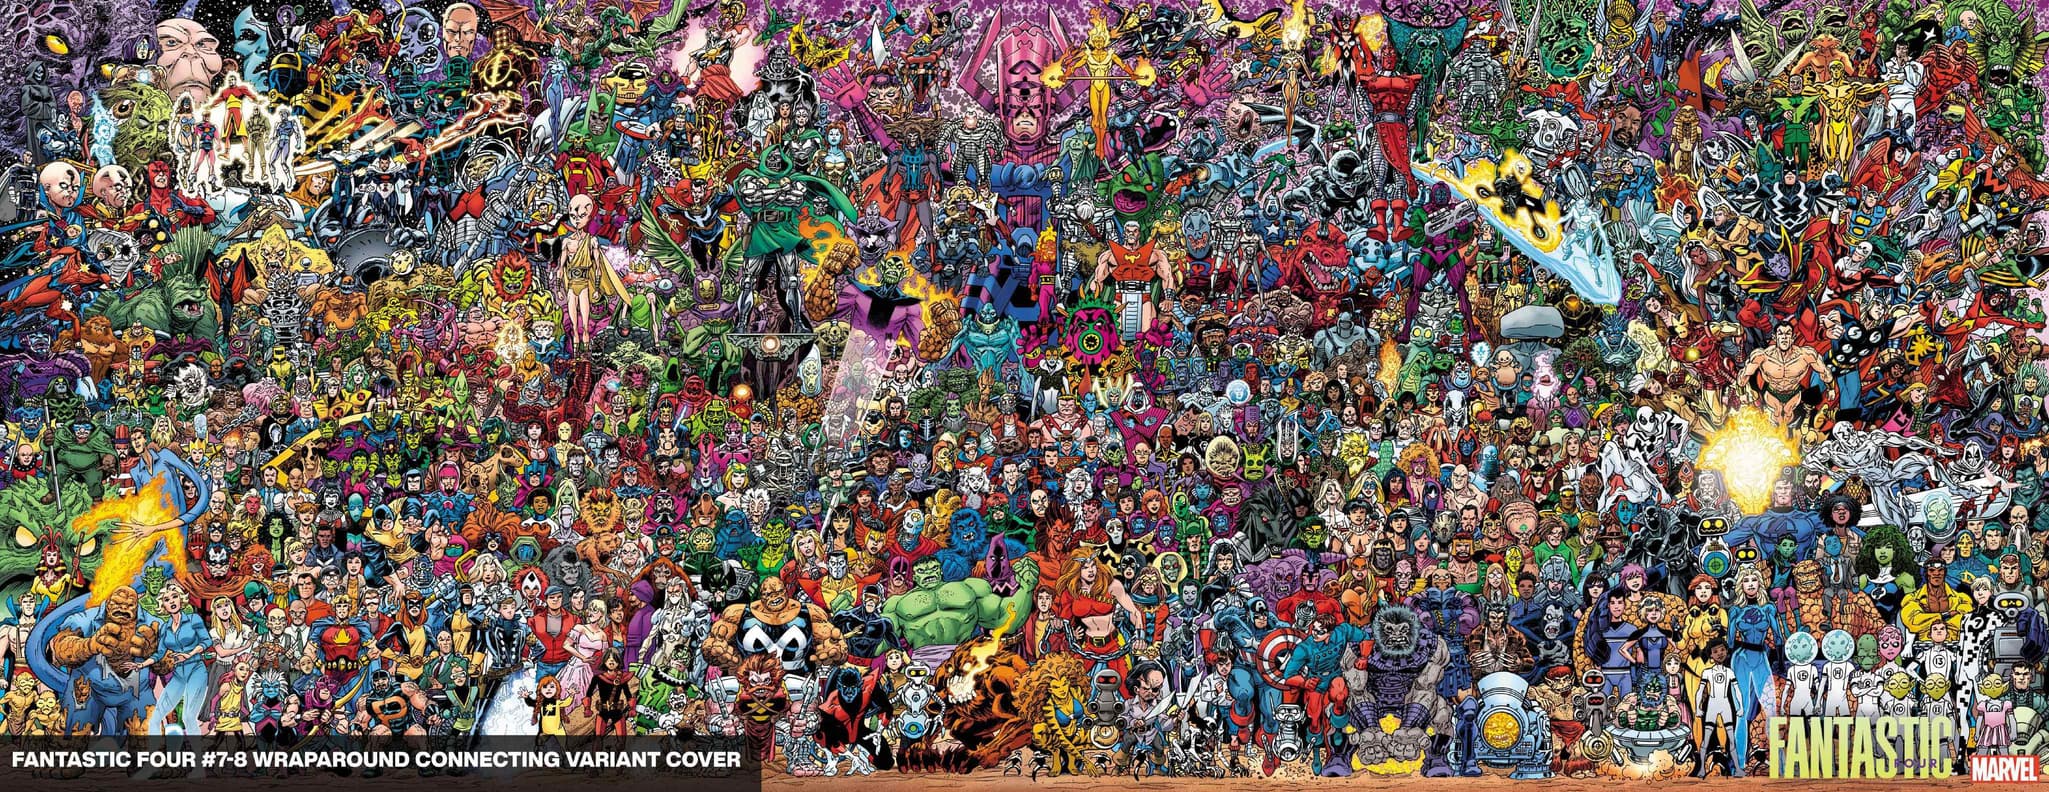 FANTASTIC FOUR #7 and # 8 Wraparound Connecting 700 Characters Variant Cover by Scott Koblish